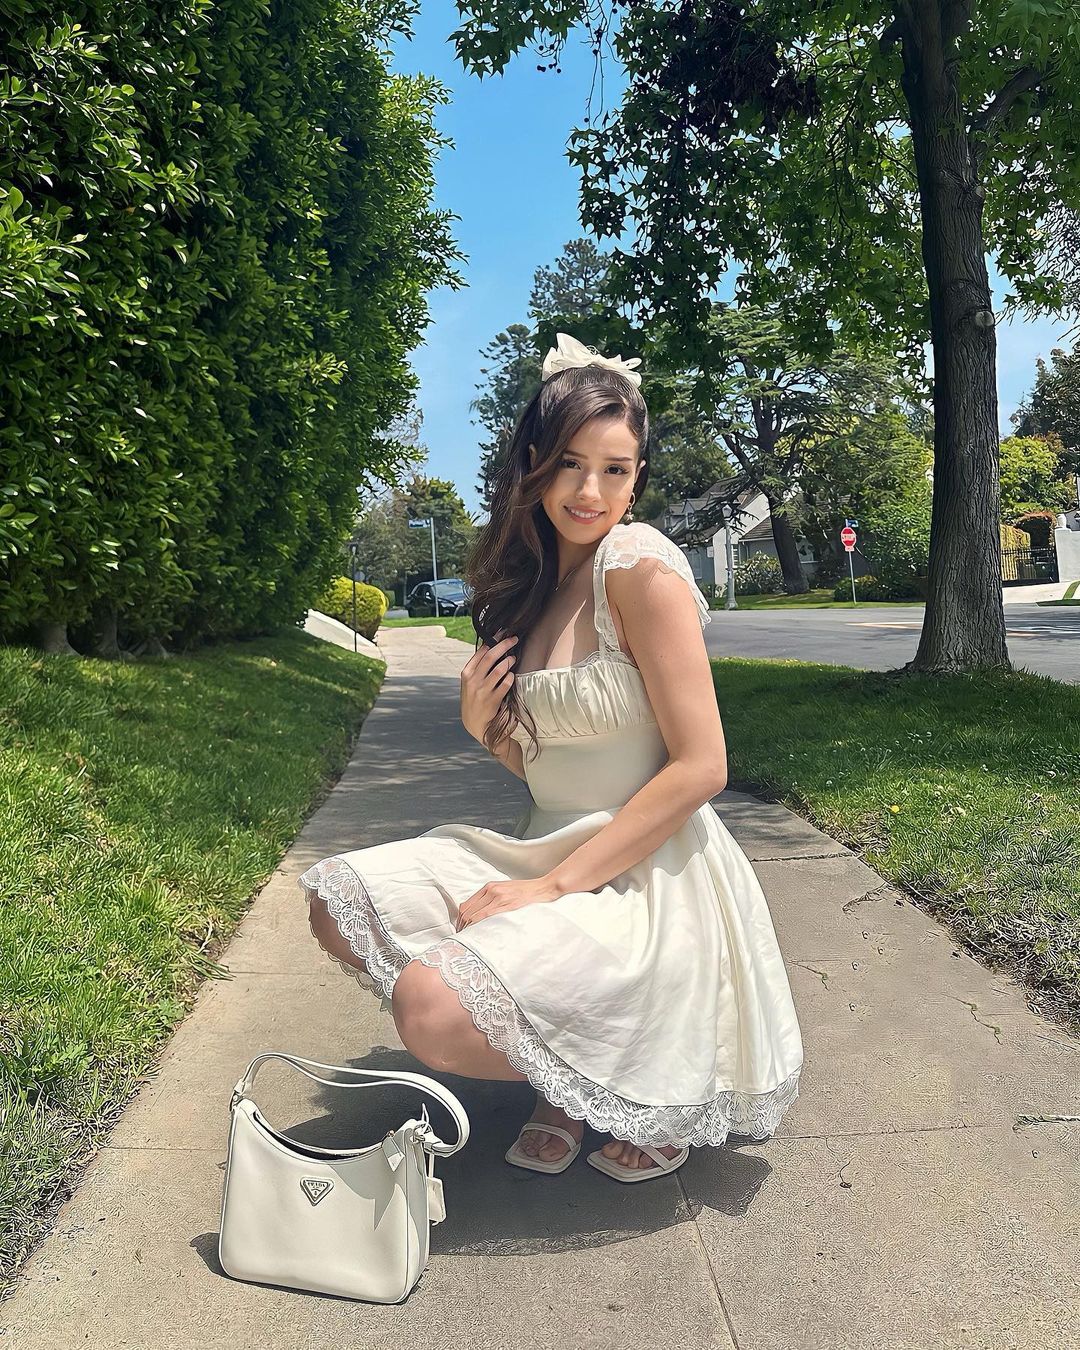 Pokimane wearing a white outfit and taking pictures in a sidewalk